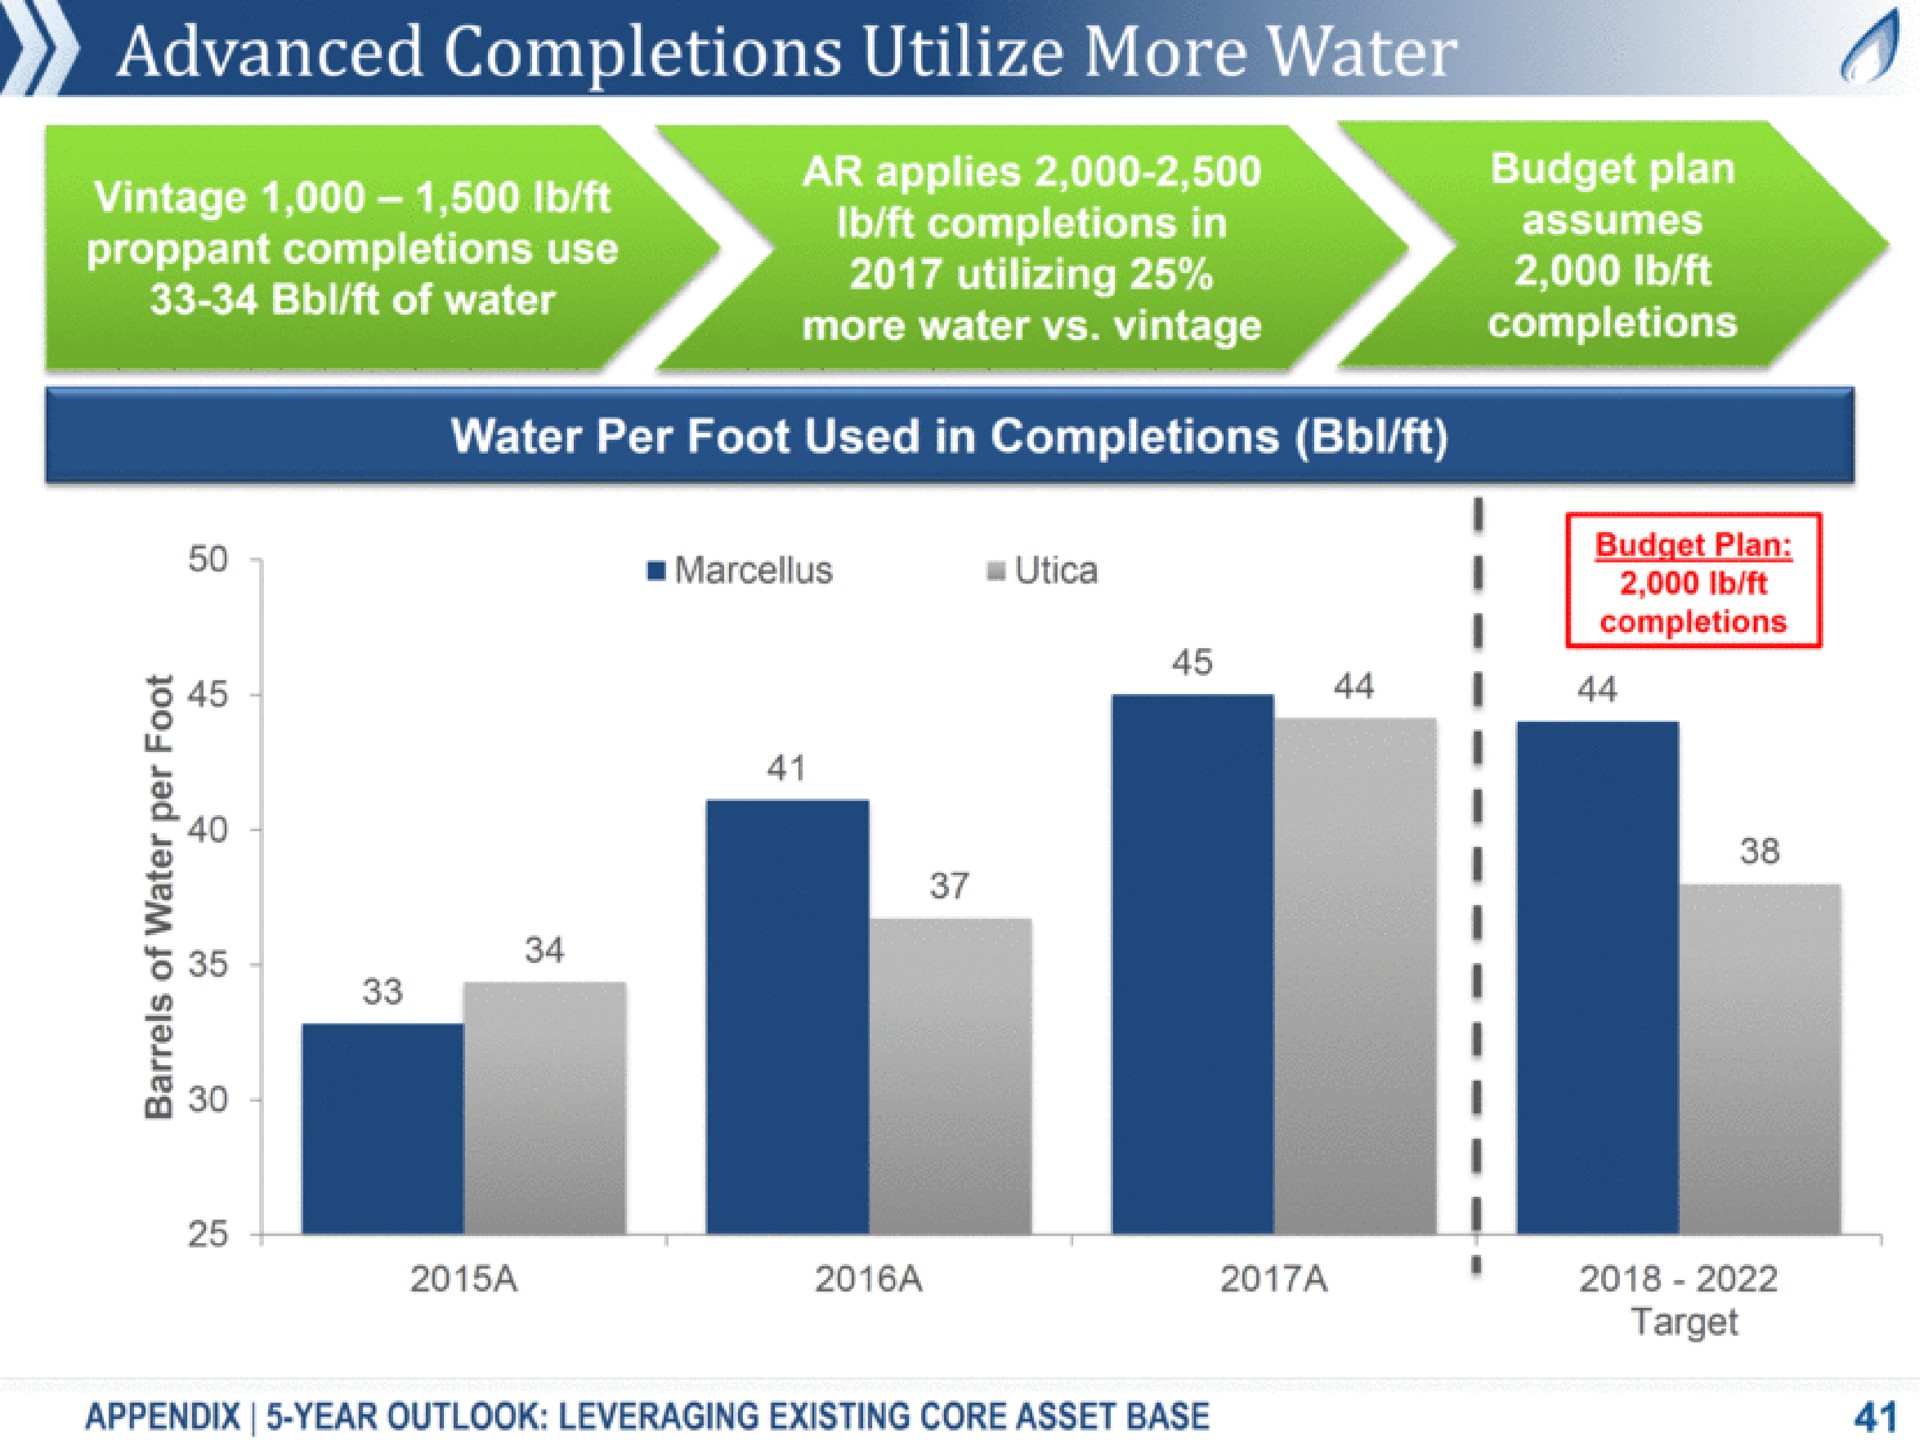 advanced completions utilize more water vintage completions use of water applies completions in utilizing more water vintage budget plan i completions water per foot used in completions budget plan completions a a i i i target a a a appendix year outlook leveraging existing core asset base | Antero Midstream Partners